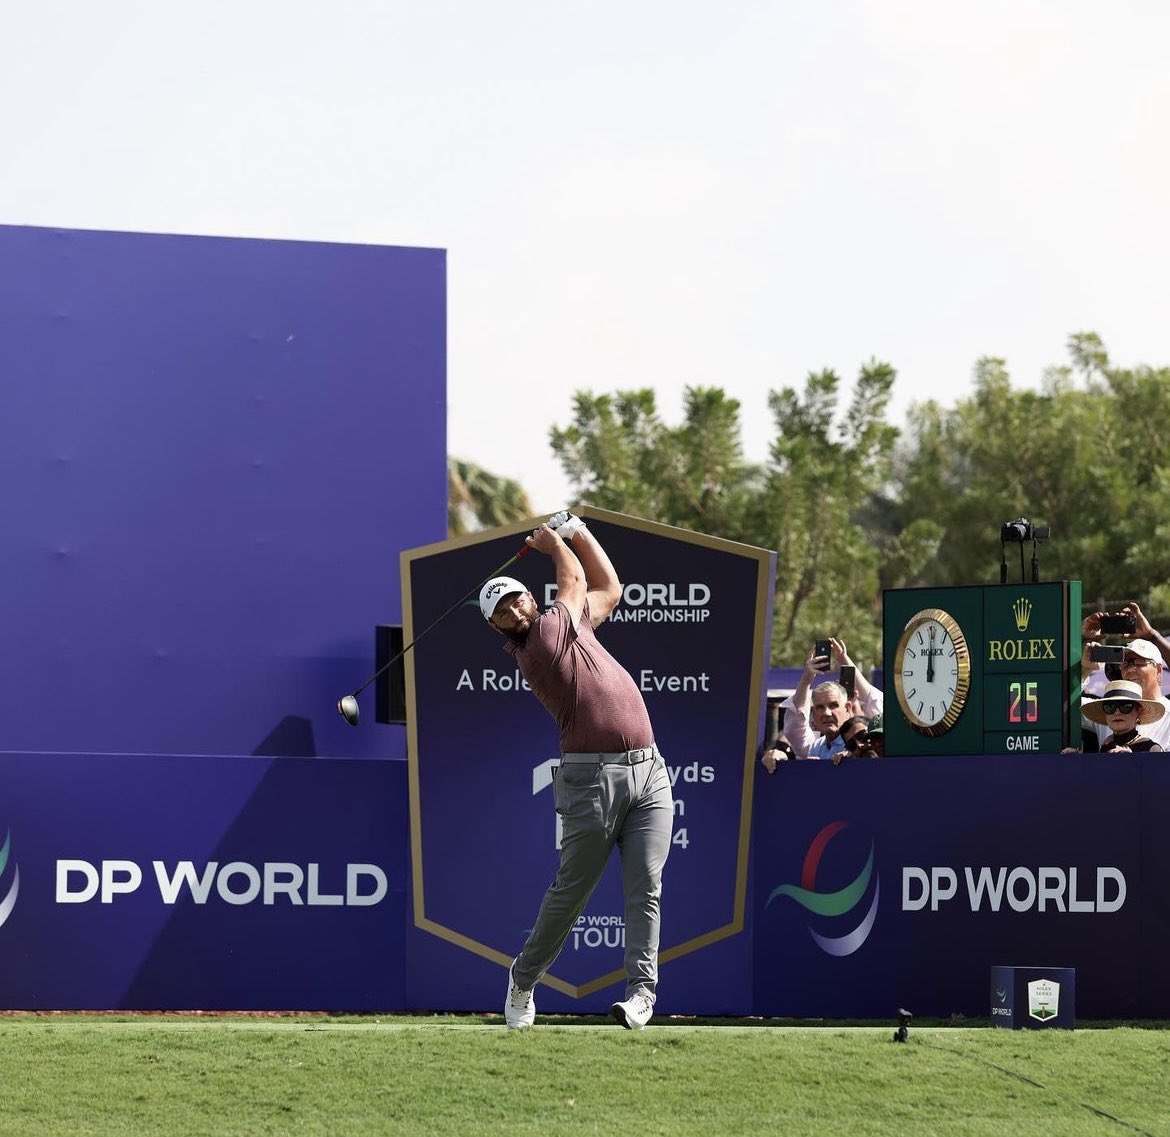 The 2024 @DPWorldTour schedule is out 🥳 Best of luck to our clients at @DubaiCreekGolf, @EmiratesGC, @YasLinksGC and @JGEGolf who will be hosting tournaments next year 🍀 #DPWorldTour #ProfessionalGolf #UAEGolf #GolfTournament #UAE #Dubai #AbuDhabi #Golf